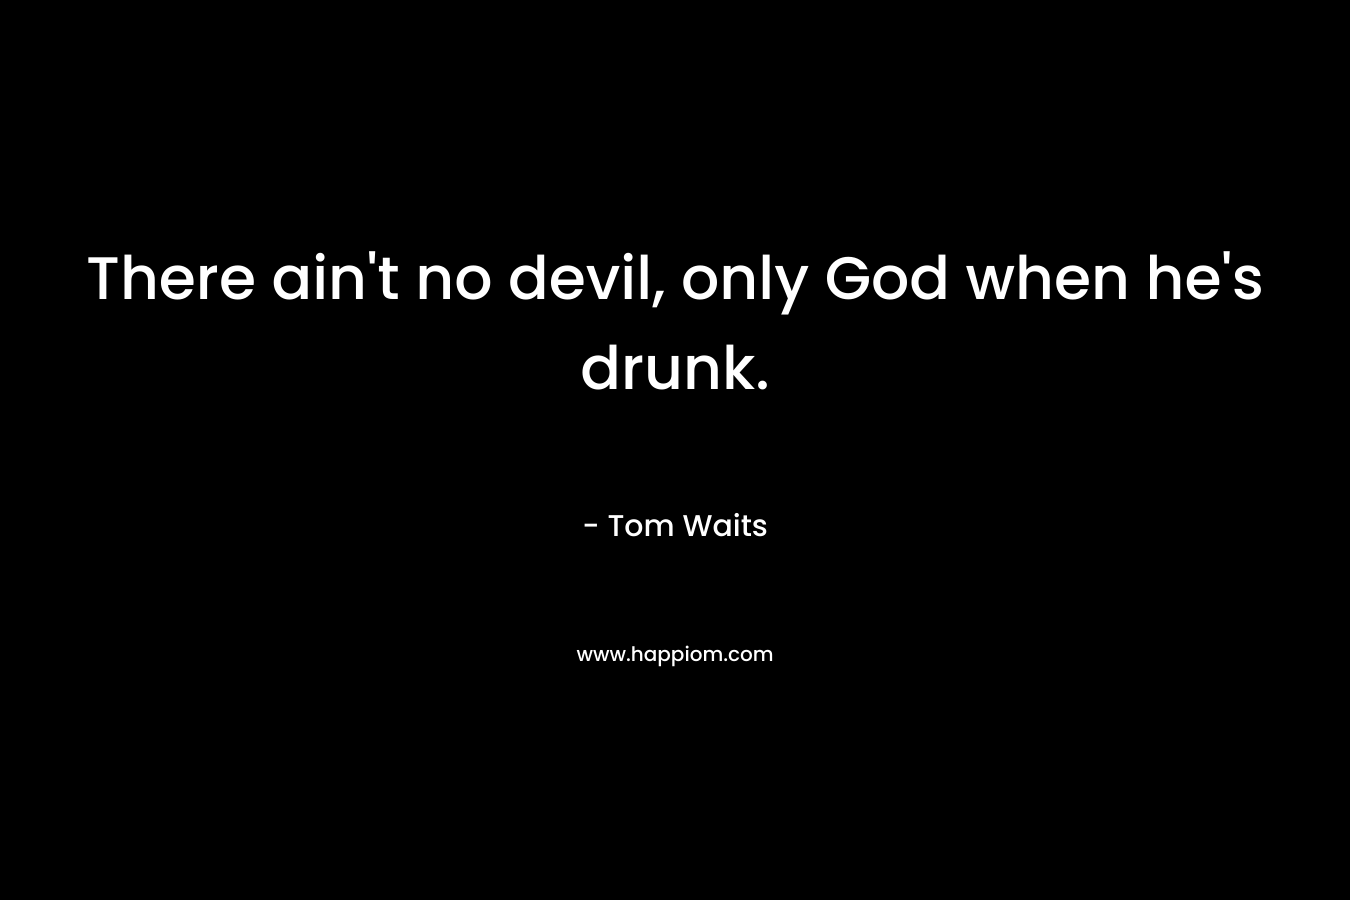 There ain’t no devil, only God when he’s drunk. – Tom Waits